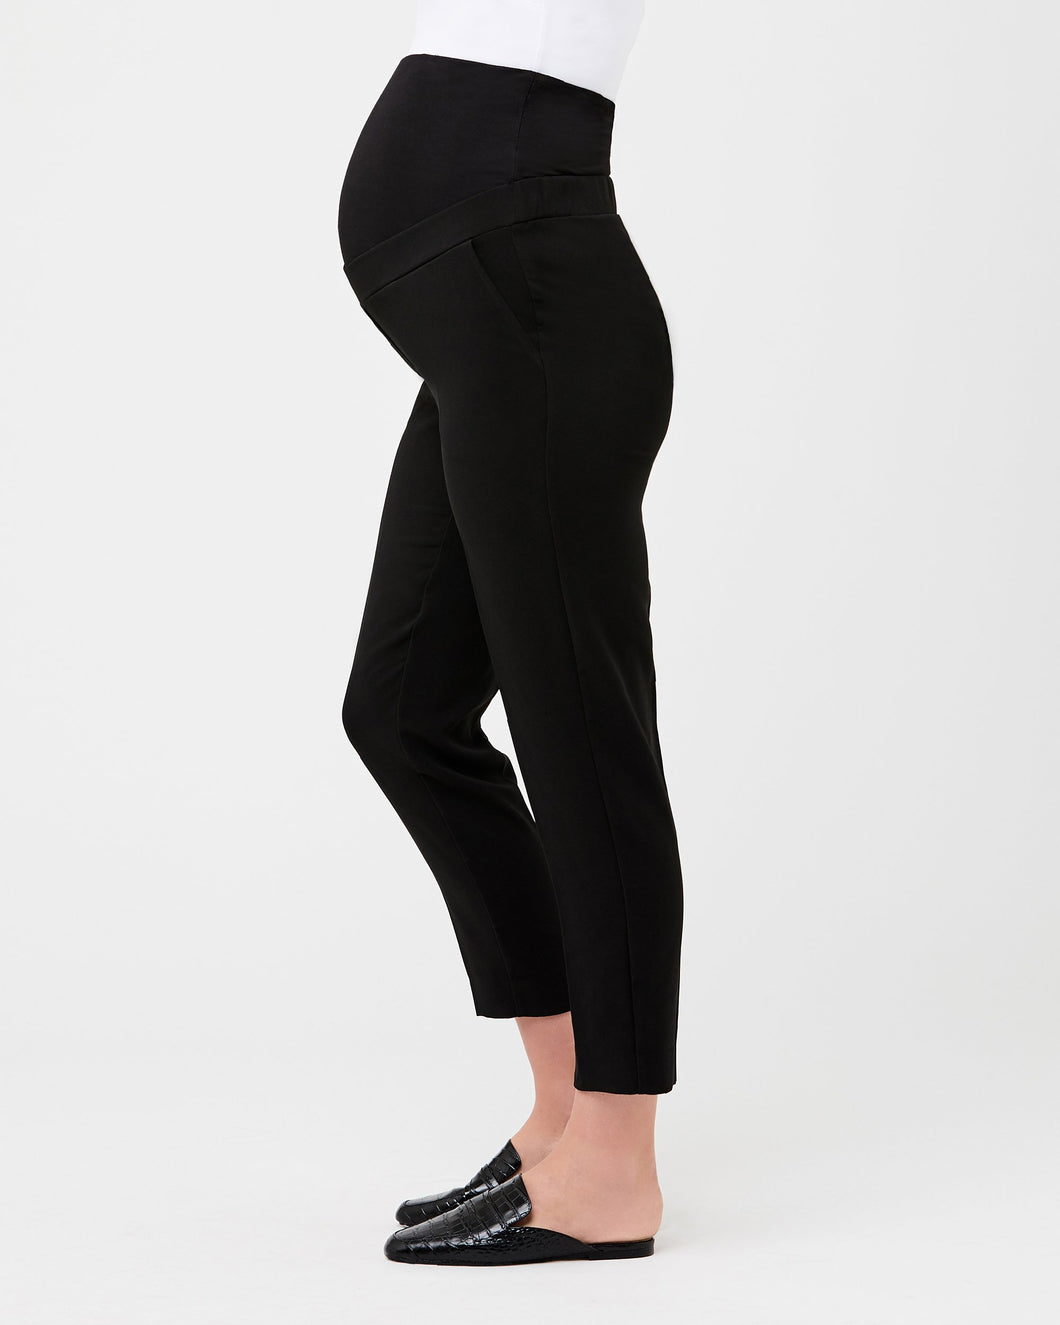 The Mom Store LeggingsBottoms  Buy The Mom Store Comfy Maternity Leggings  Black Online  Nykaa Fashion